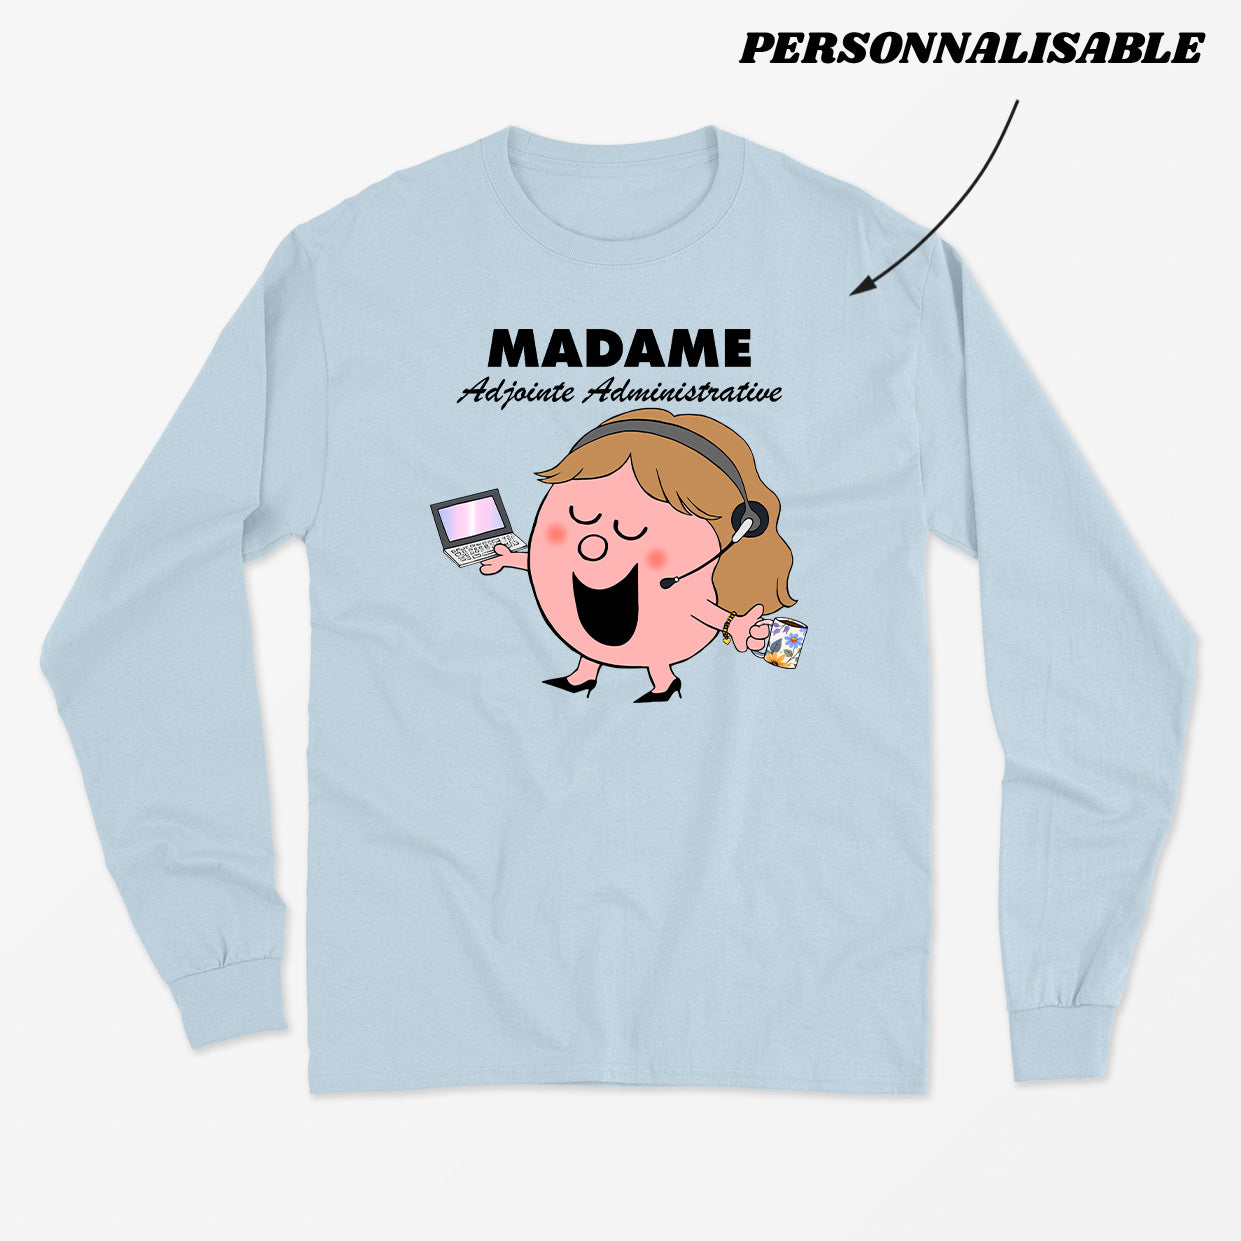 MADAME ADMINISTRATION  longsleeve unisexe personnalisable - tamelo boutique